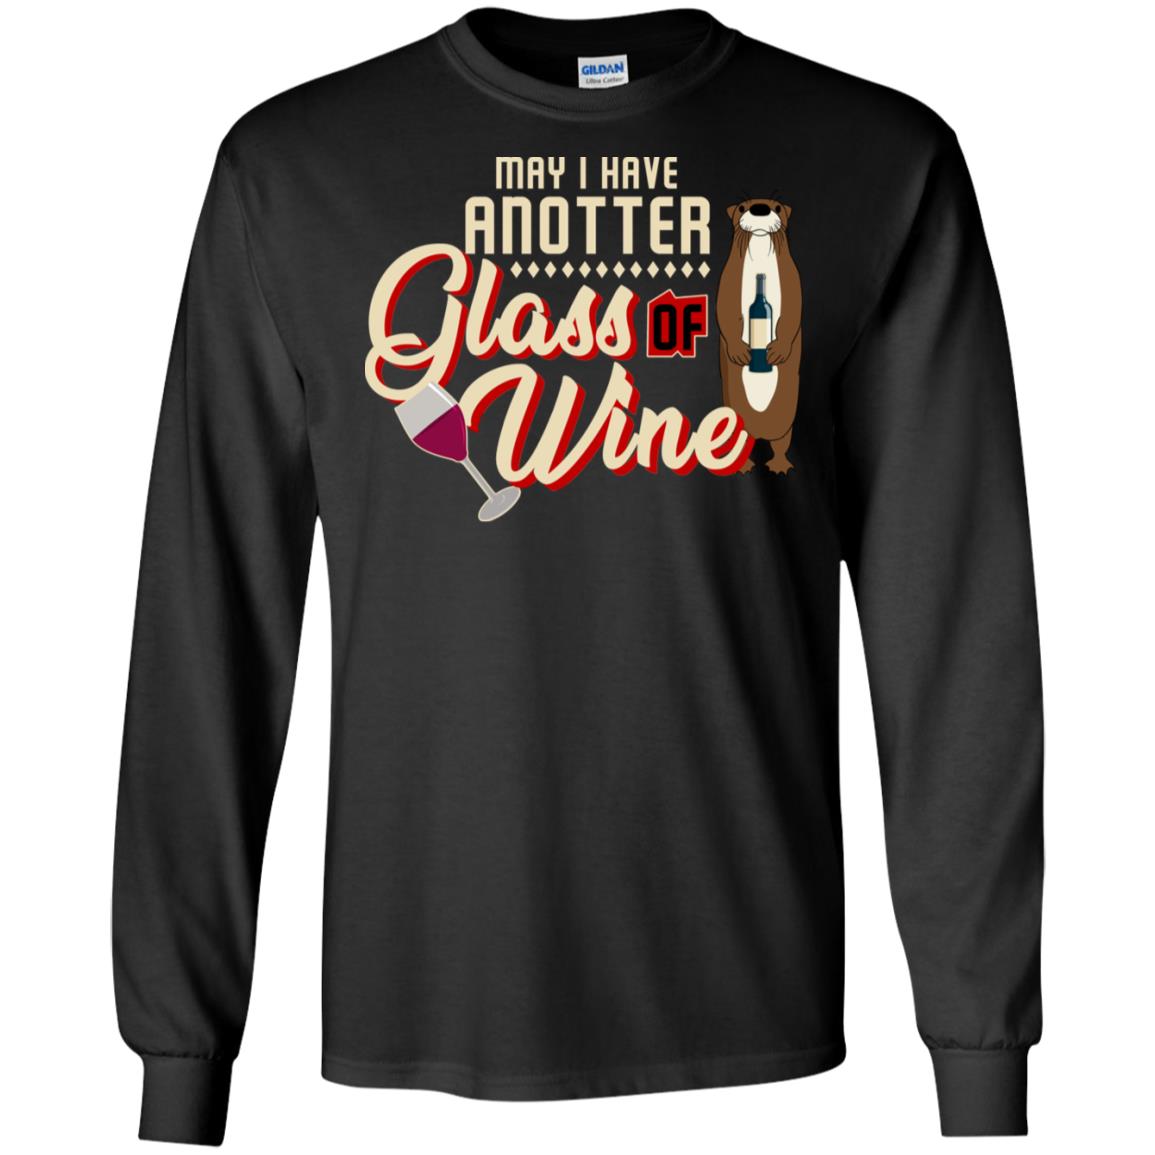 May I Have Anotter Glass Of Wine Funny Otter Shirt For Drinking LoversG240 Gildan LS Ultra Cotton T-Shirt